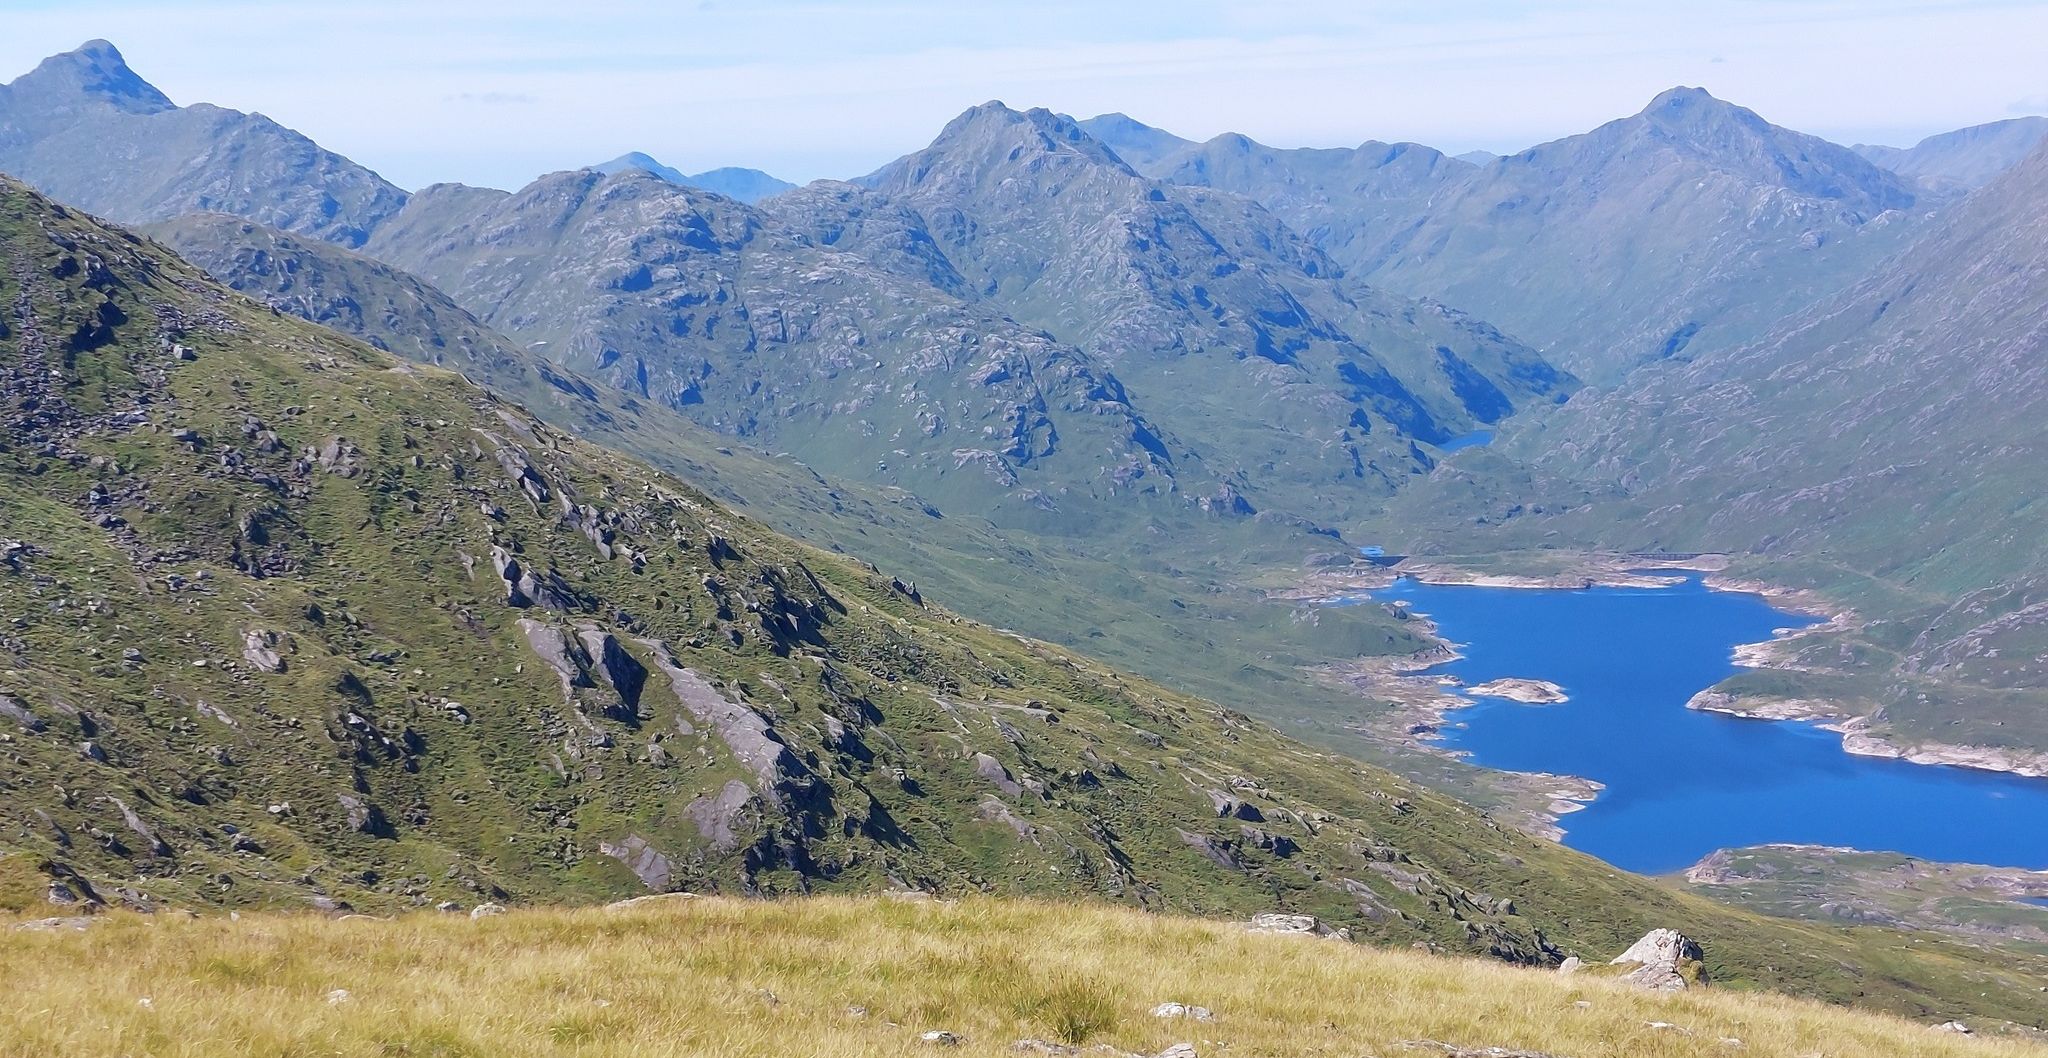 Peaks of Knoydart and Loch Quoich from Sgurr Mor